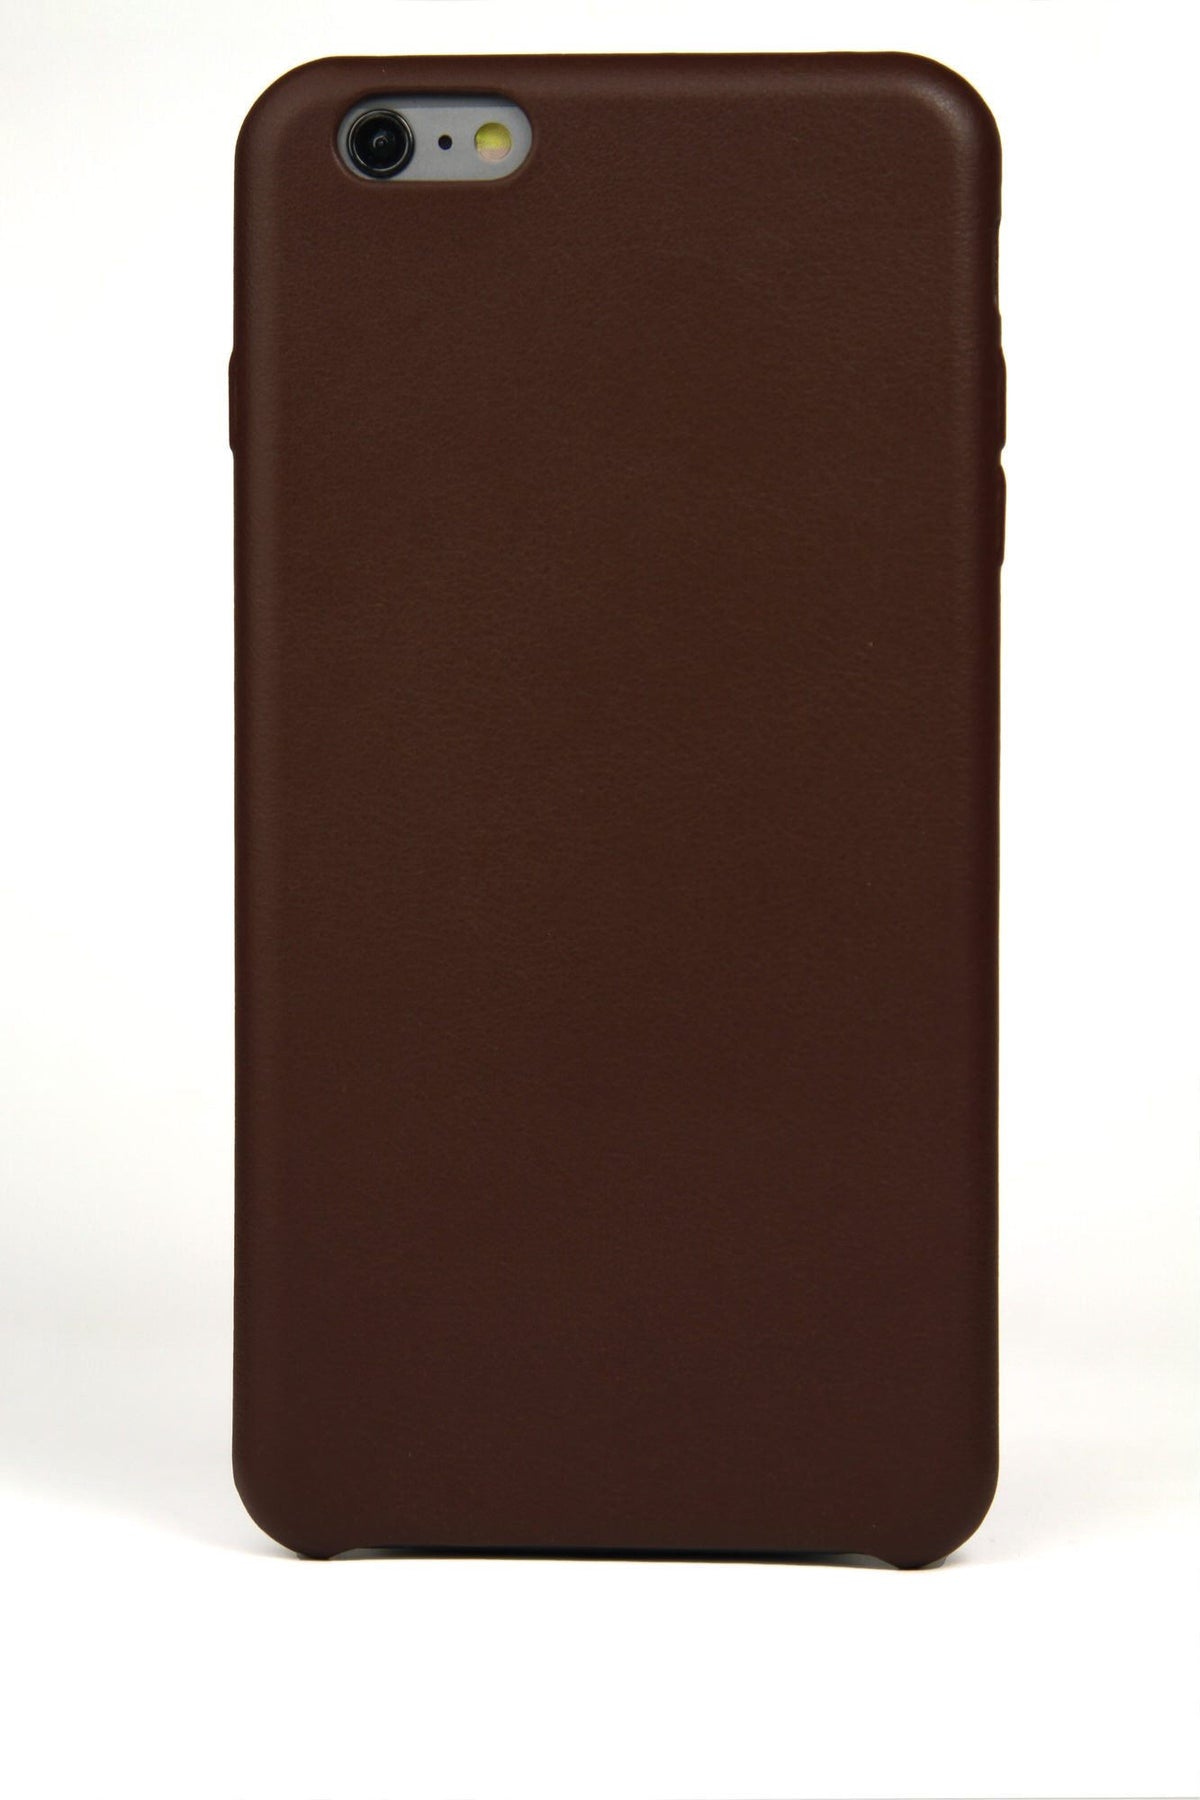 iPhone 6 Plus Case, Brown Leather